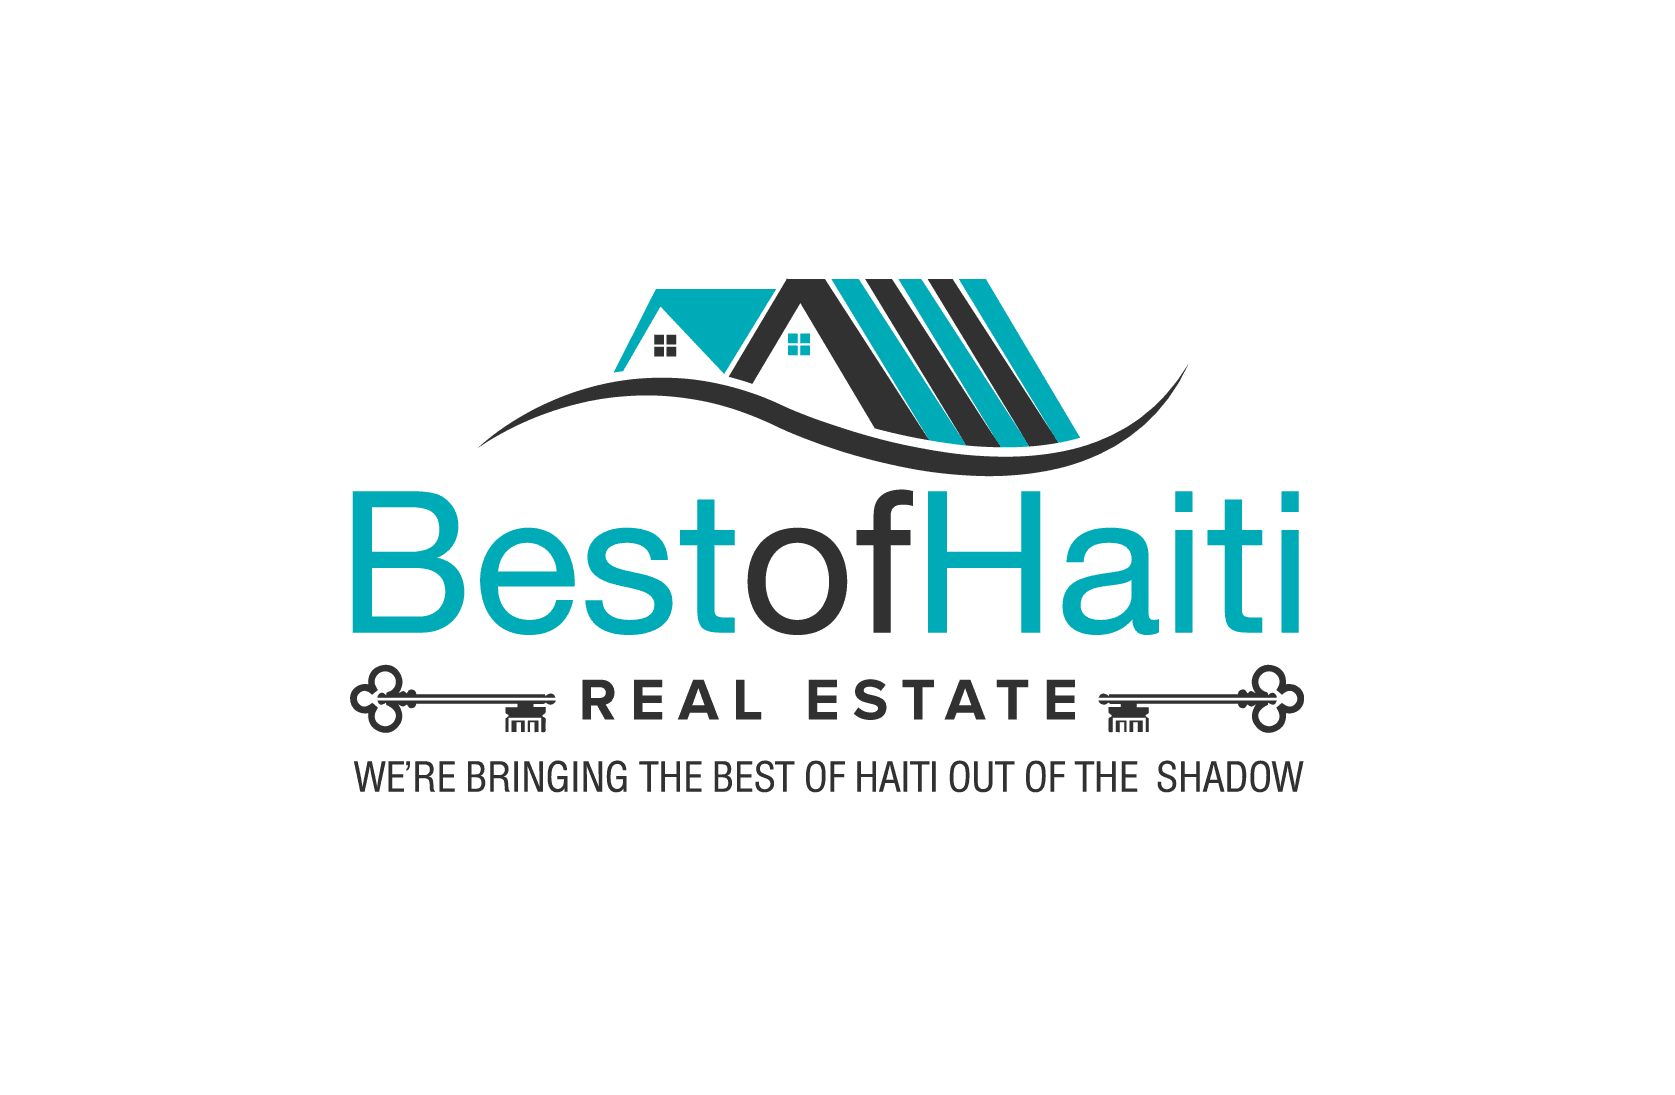 4 Bedrooms, 4 Baths, Un / Furnished Apartment For Rent In Fermathe 45, Kenscoff, Haiti